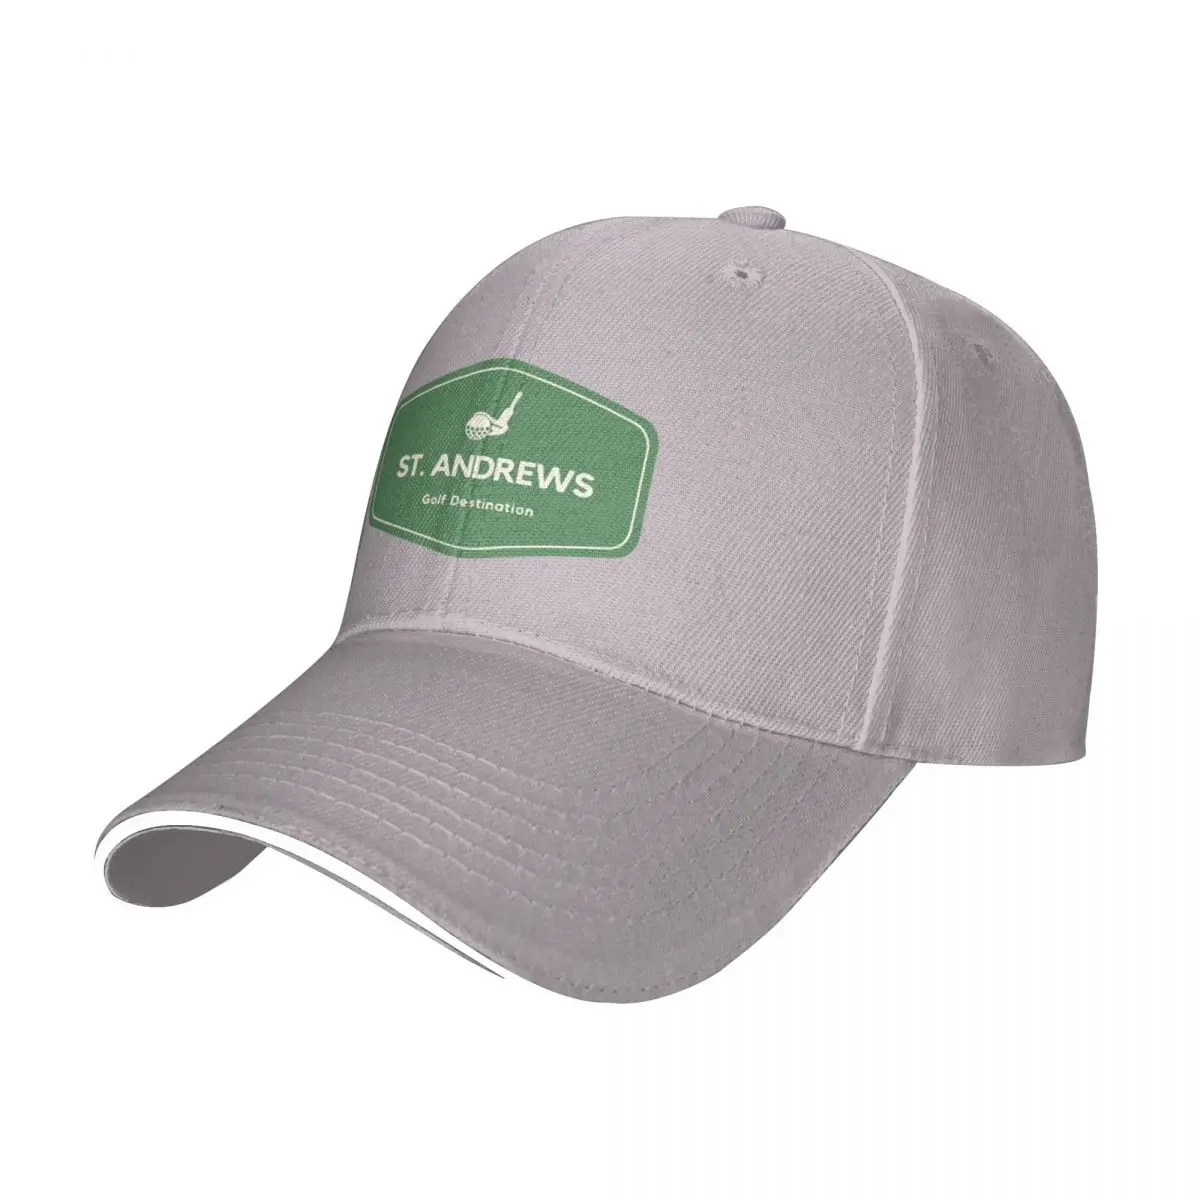 

New St Andrews in Scotland - Golf Old Course Travel Destination Logo Cap Baseball Cap new in hat women's beach outlet Men's